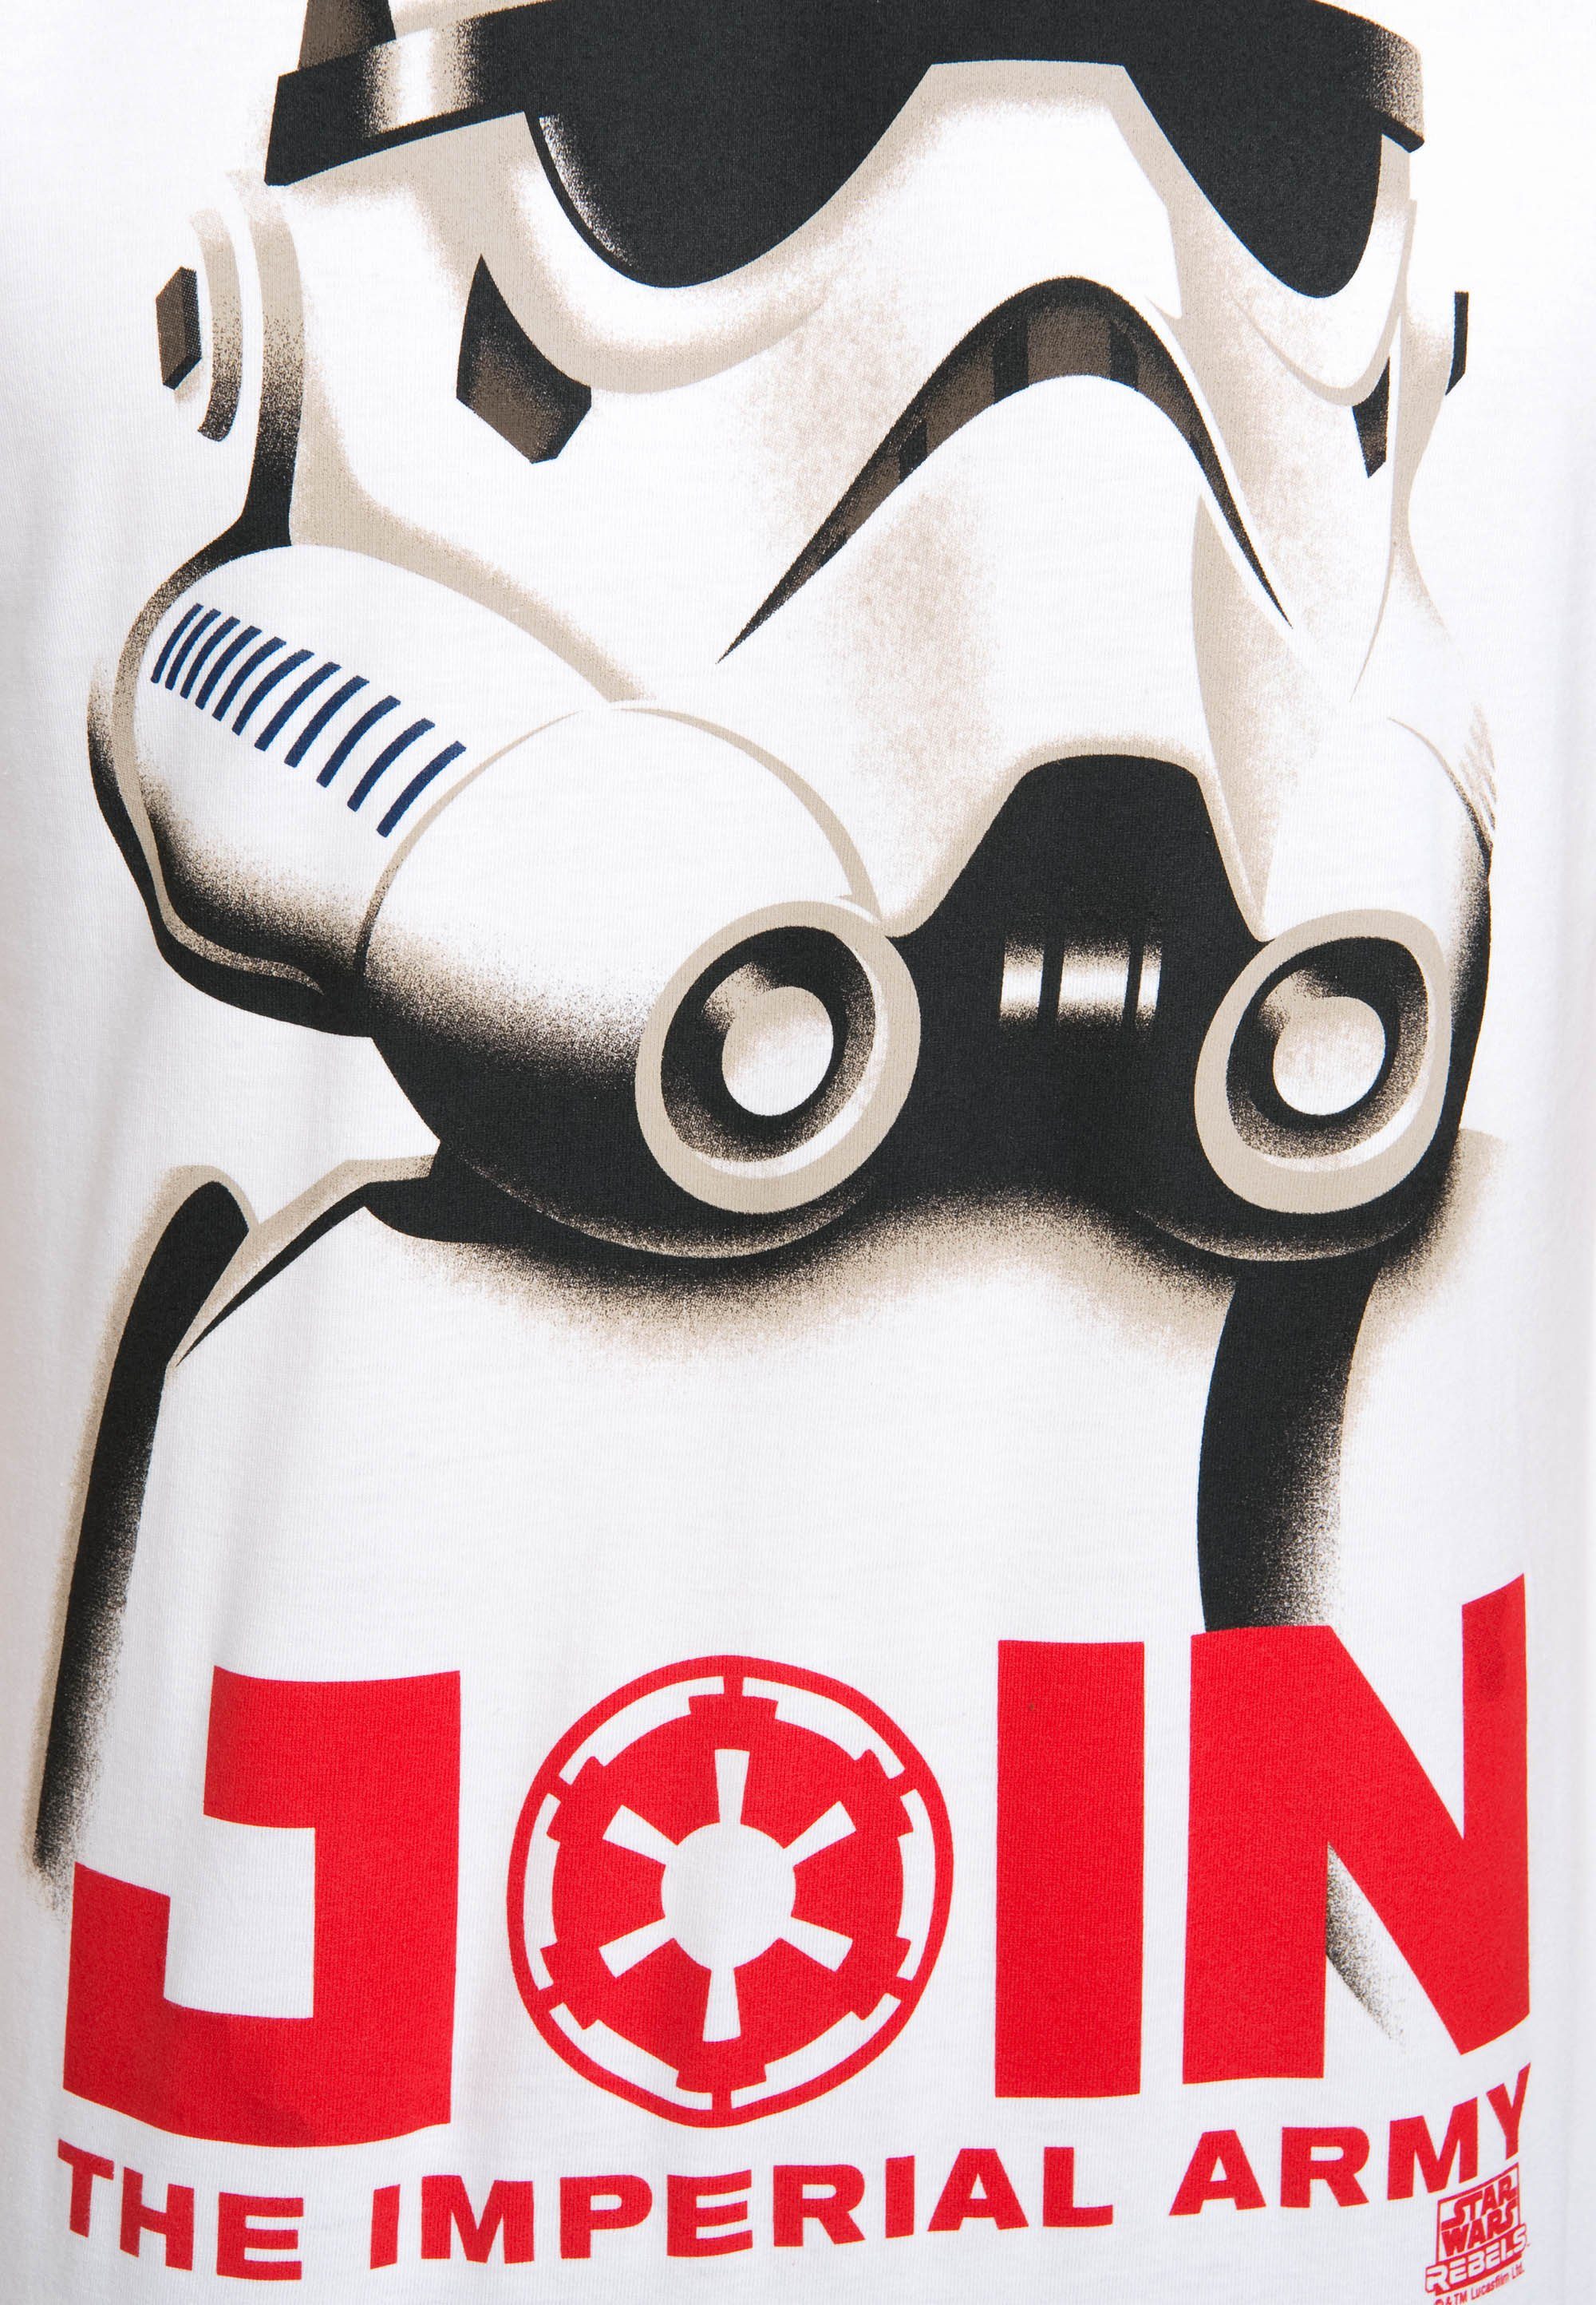 großem mit the LOGOSHIRT Imperial Join Army - Star T-Shirt Stormtrooper Wars-Print